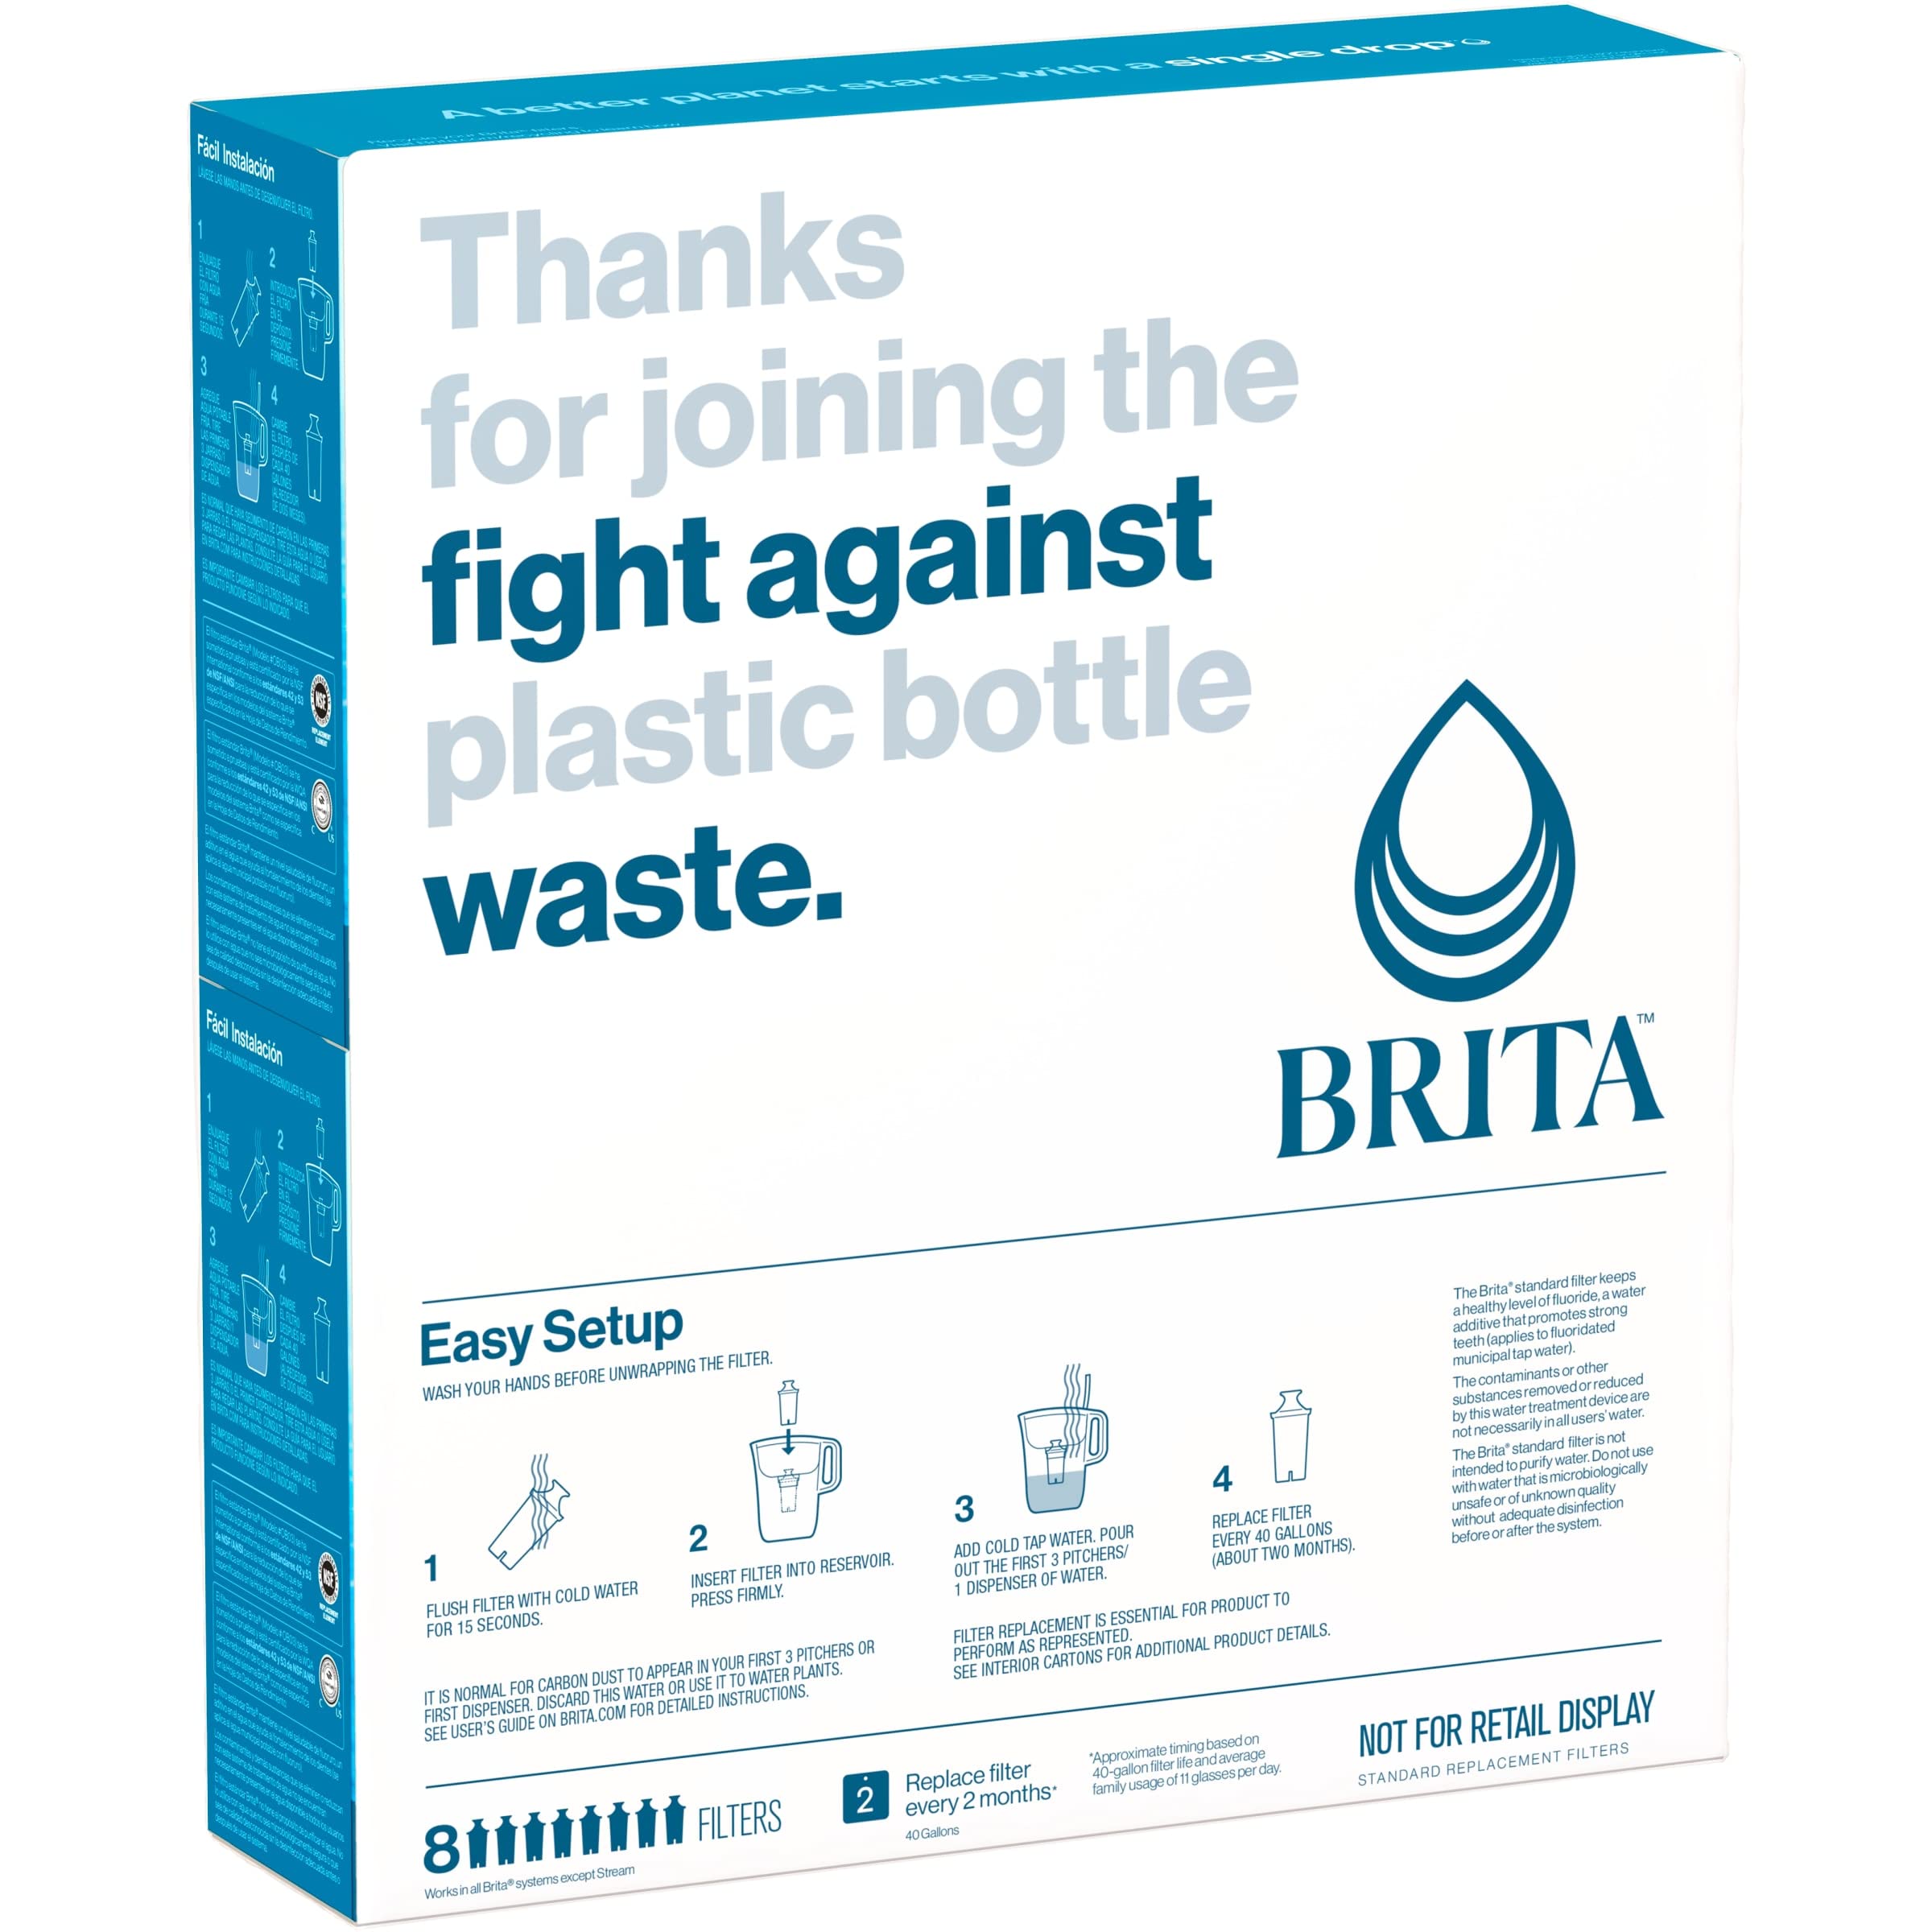 Brita Standard Water Filter Replacements for Pitchers and Dispensers, Lasts 2 Months, Reduces Chlorine Taste and Odor, 8 Count